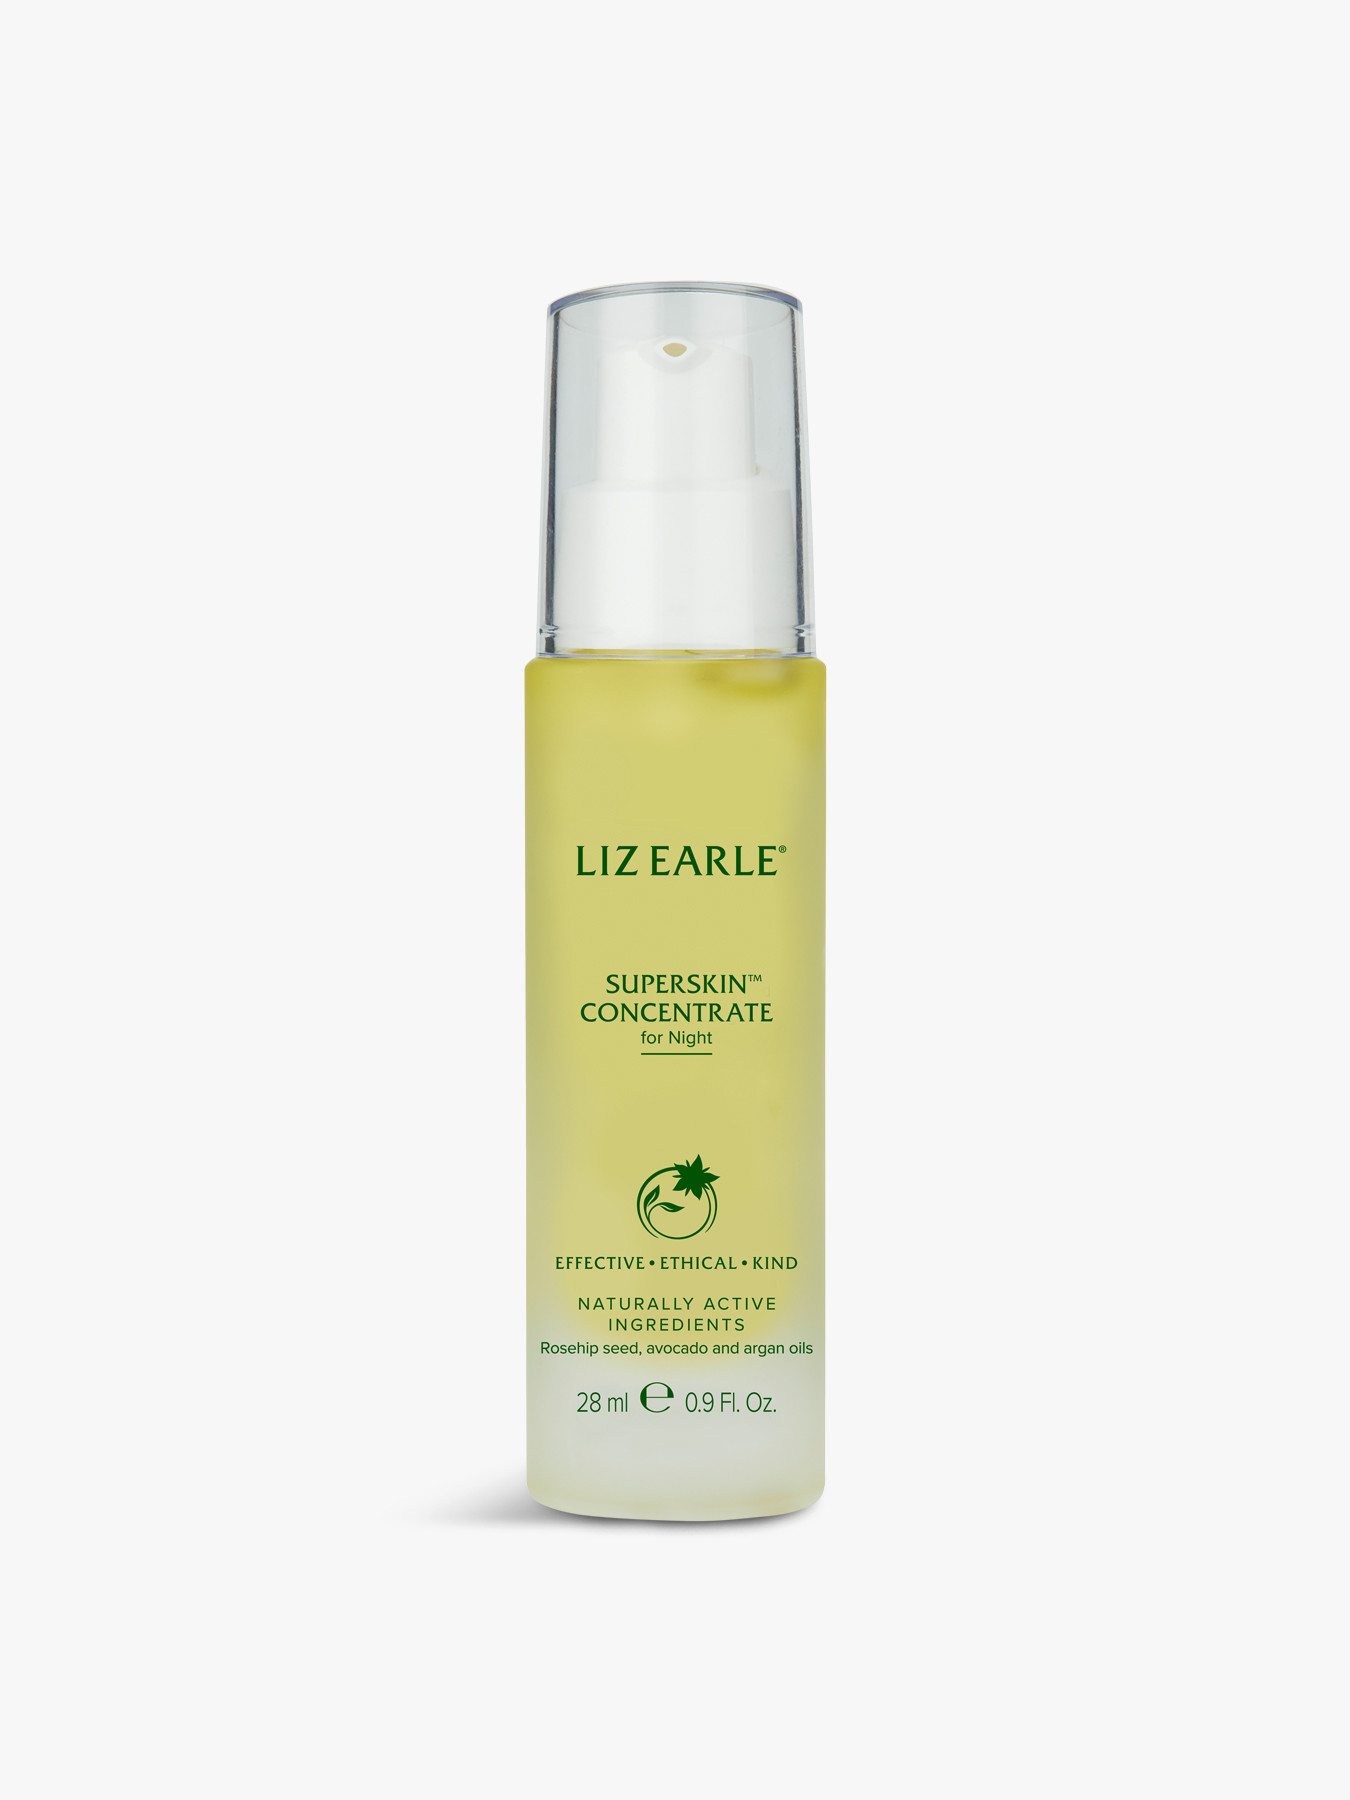 Liz Earle Superskin Concentrate Night 28ml